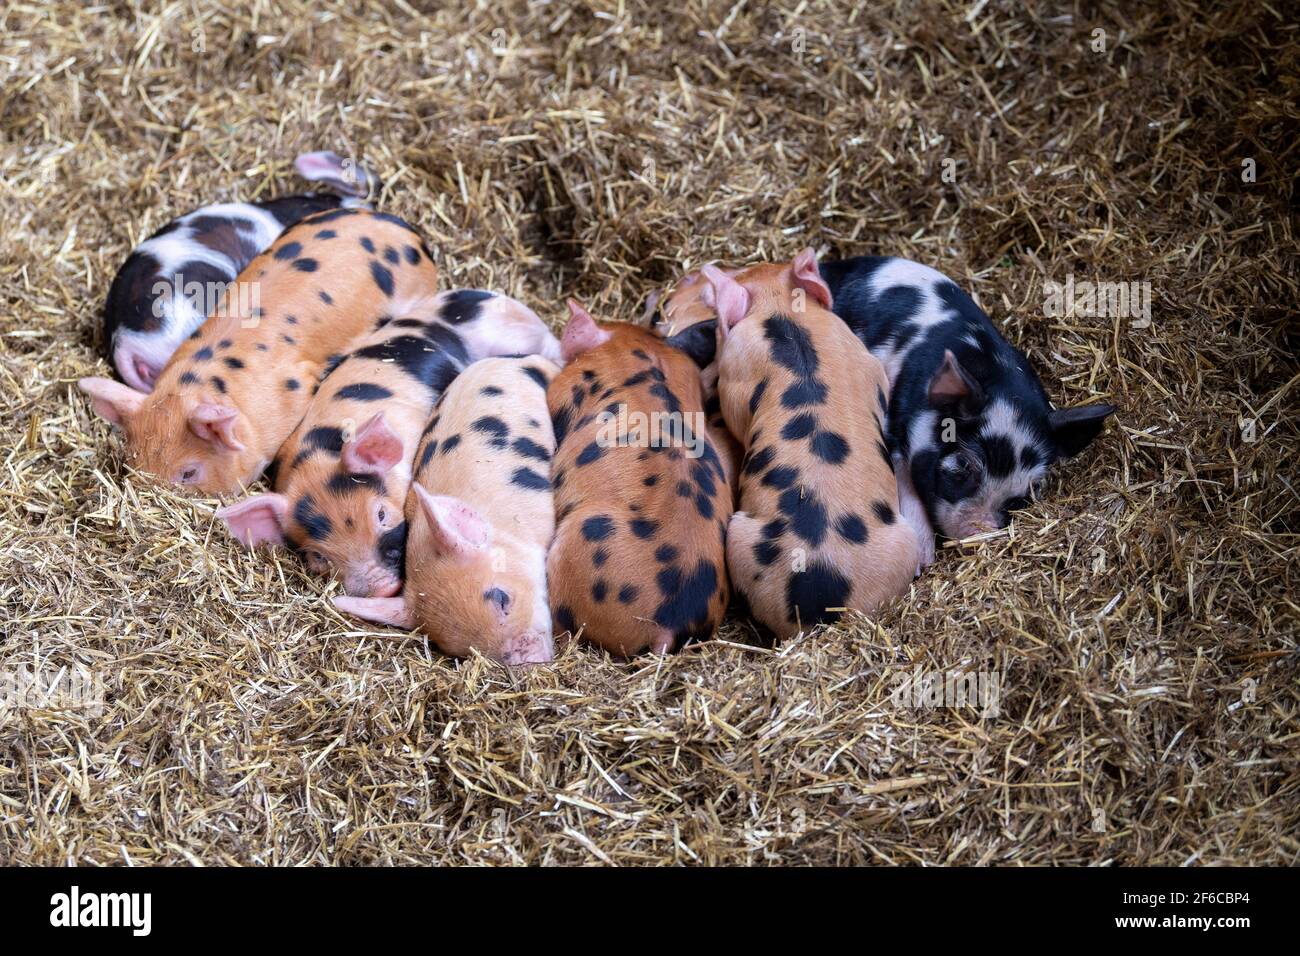 Litter of free range piglets sleeping in a pile on a straw bed, North Yorkshire, UK. Stock Photo